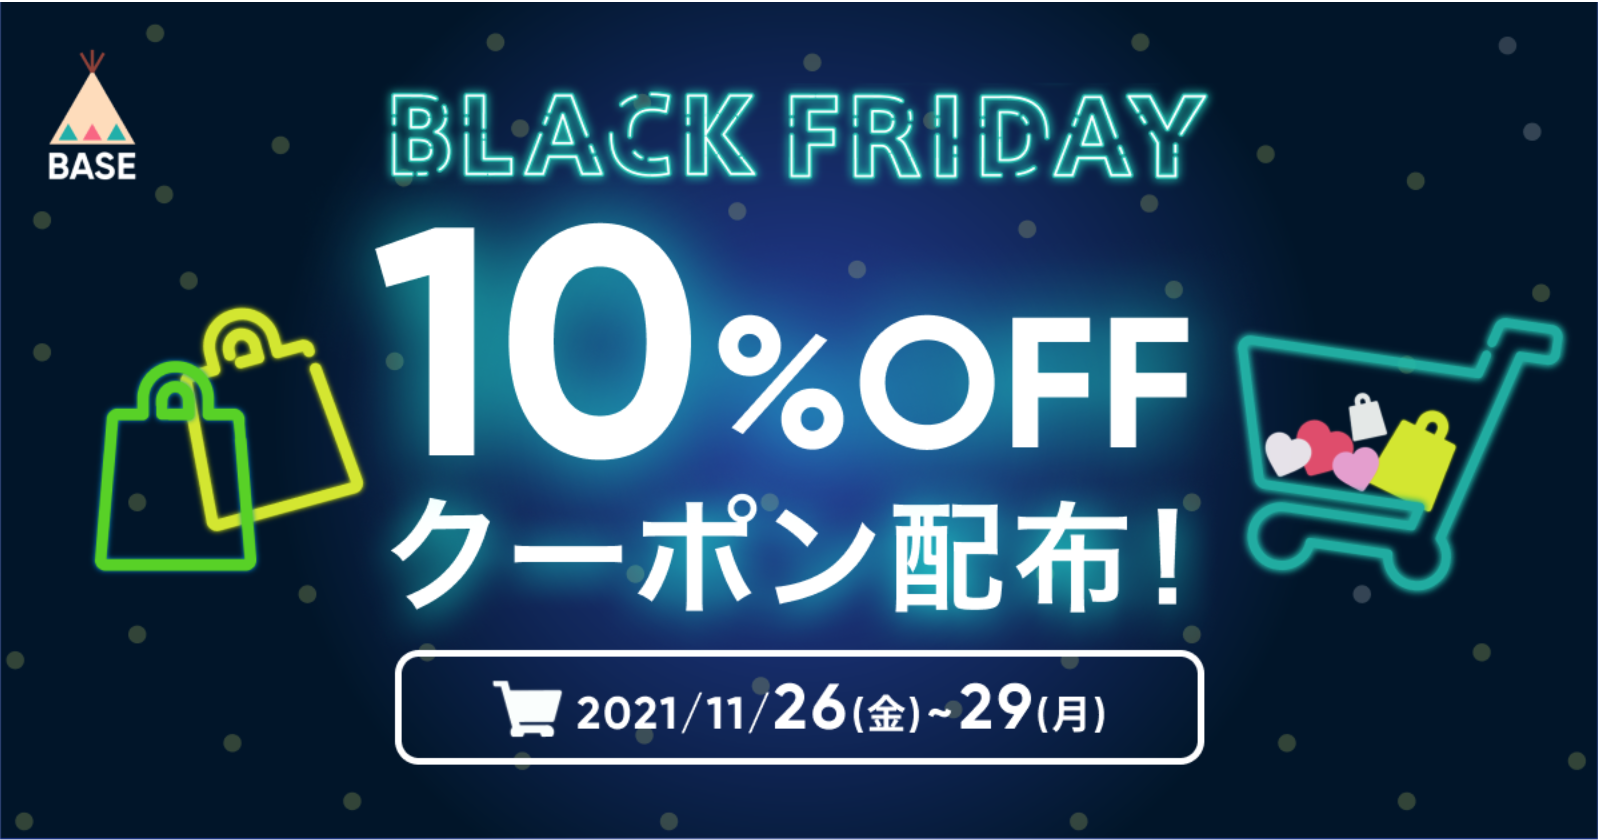 BLACK FRIDAY <10%OFF>  COUPON